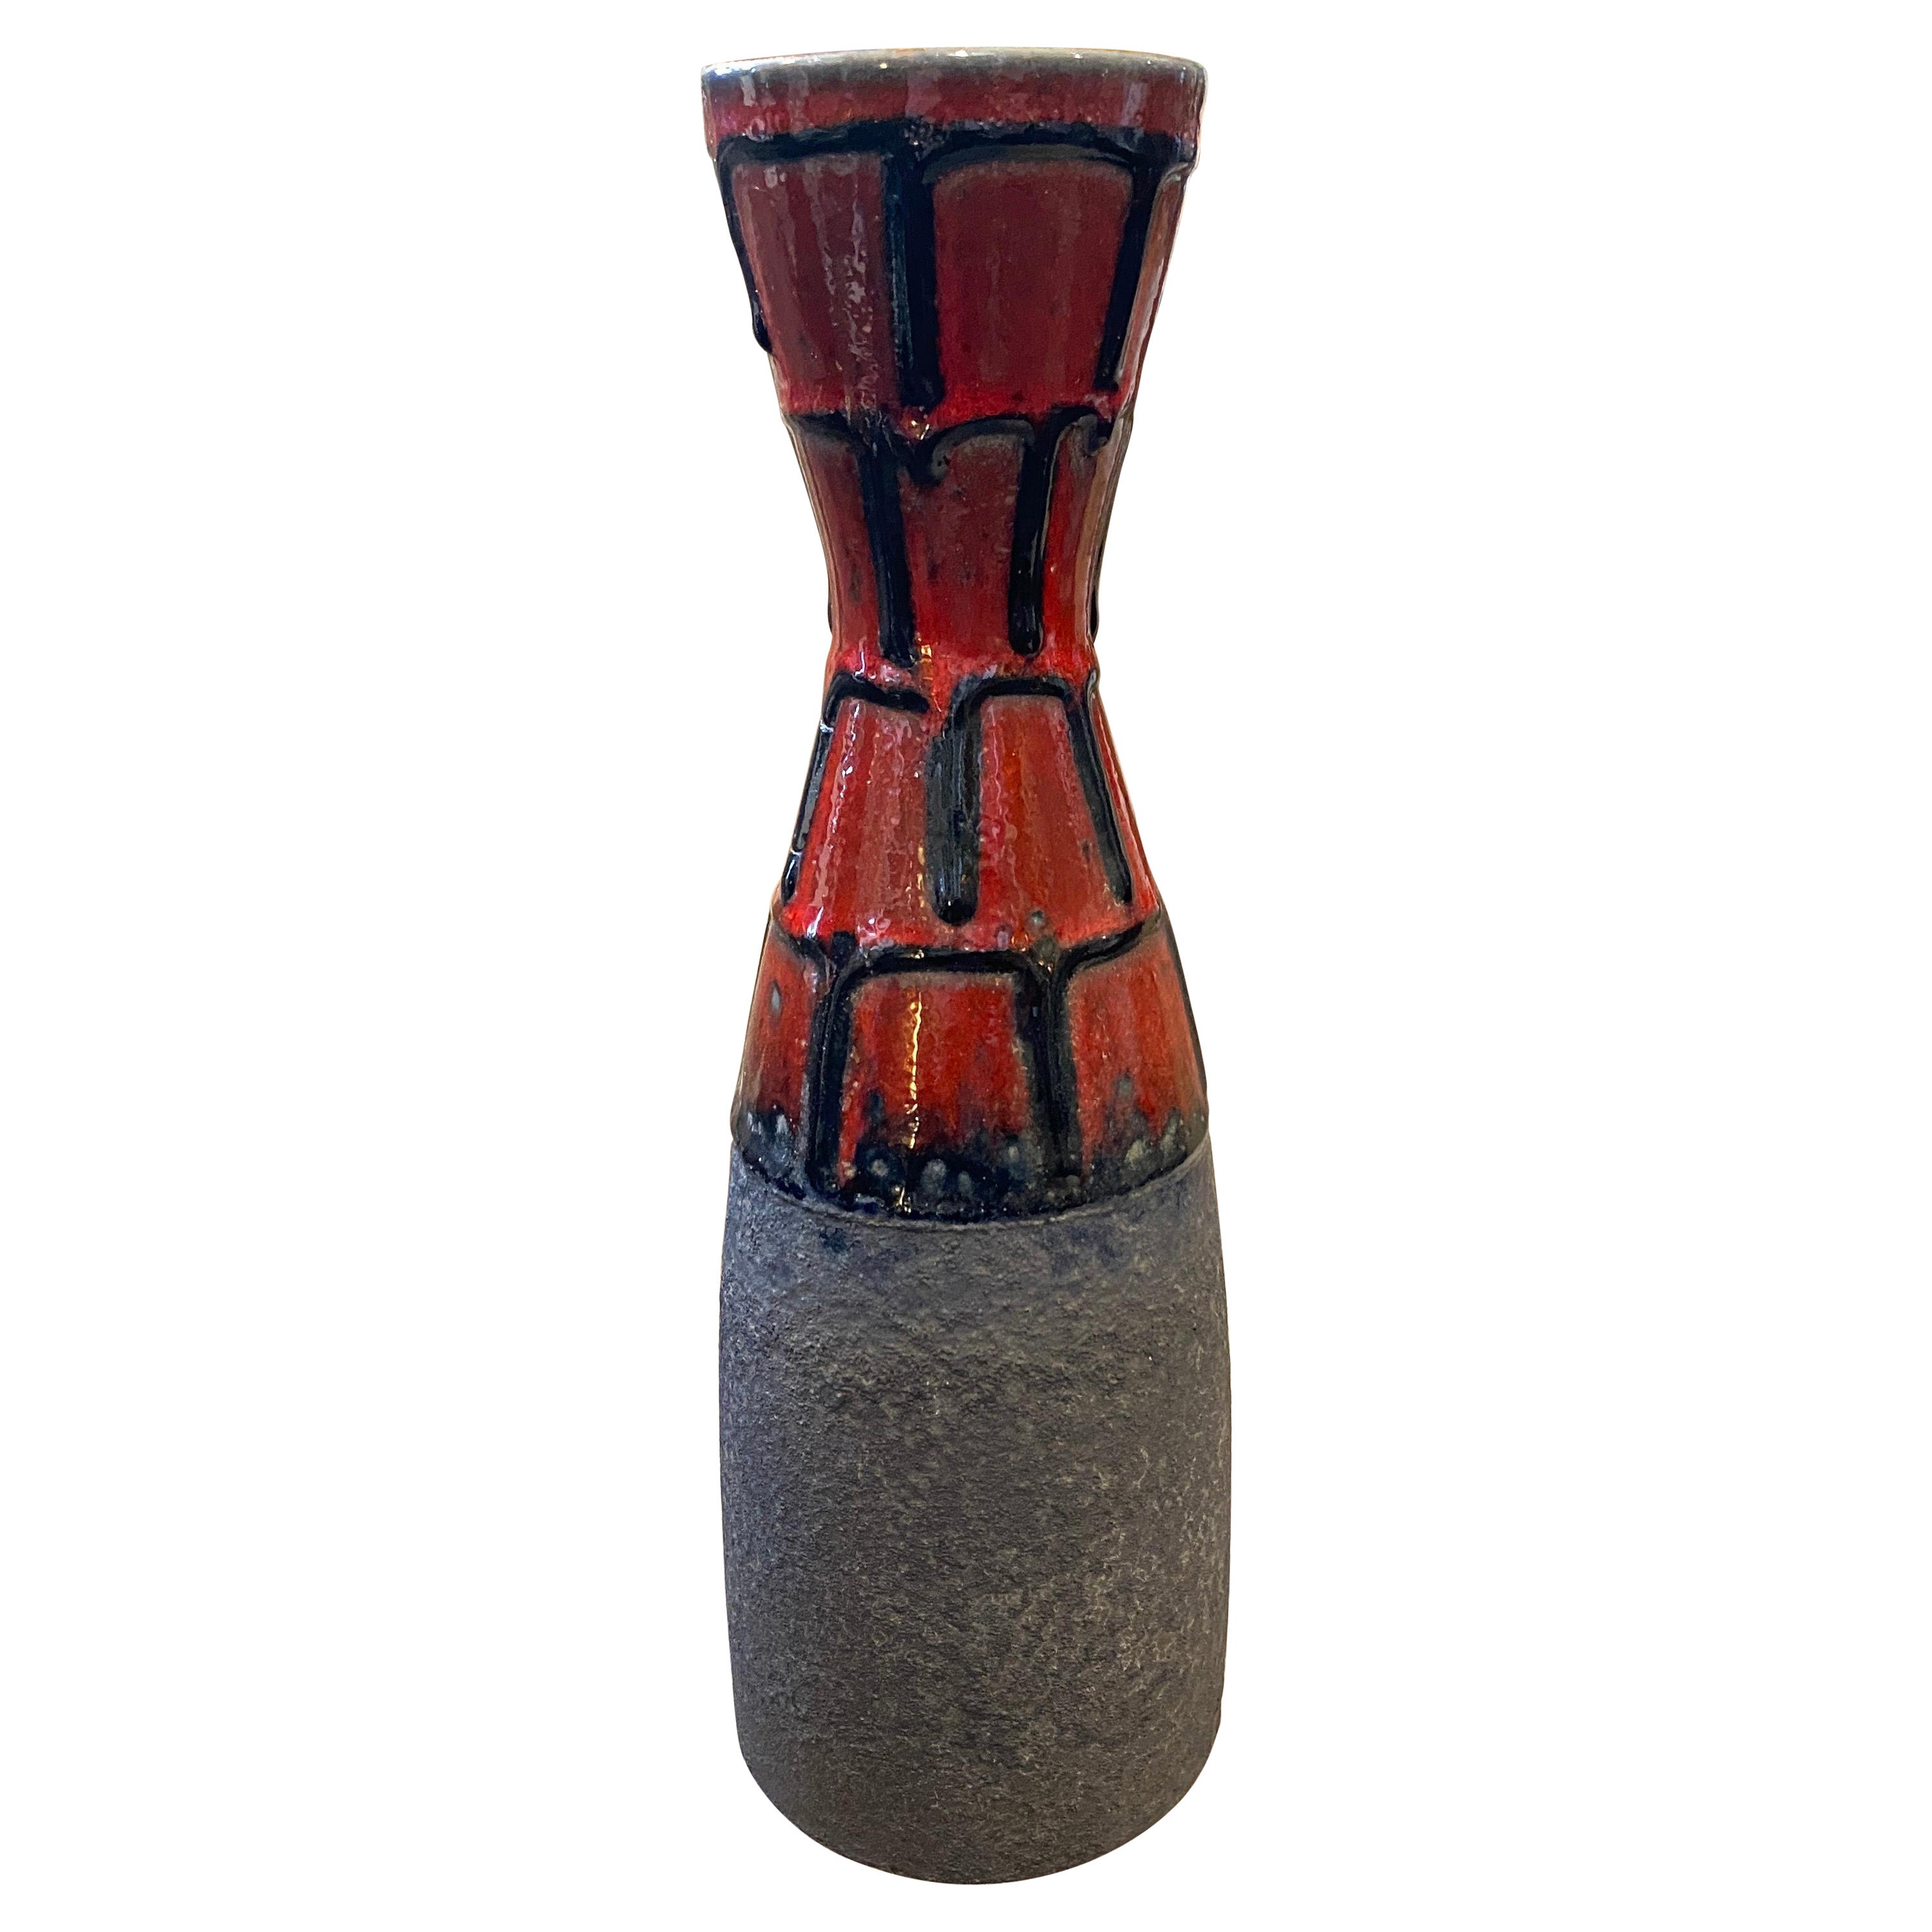 1970s Mid-Century Modern Red and Black Fat Lava Ceramic Vase by Roth For Sale